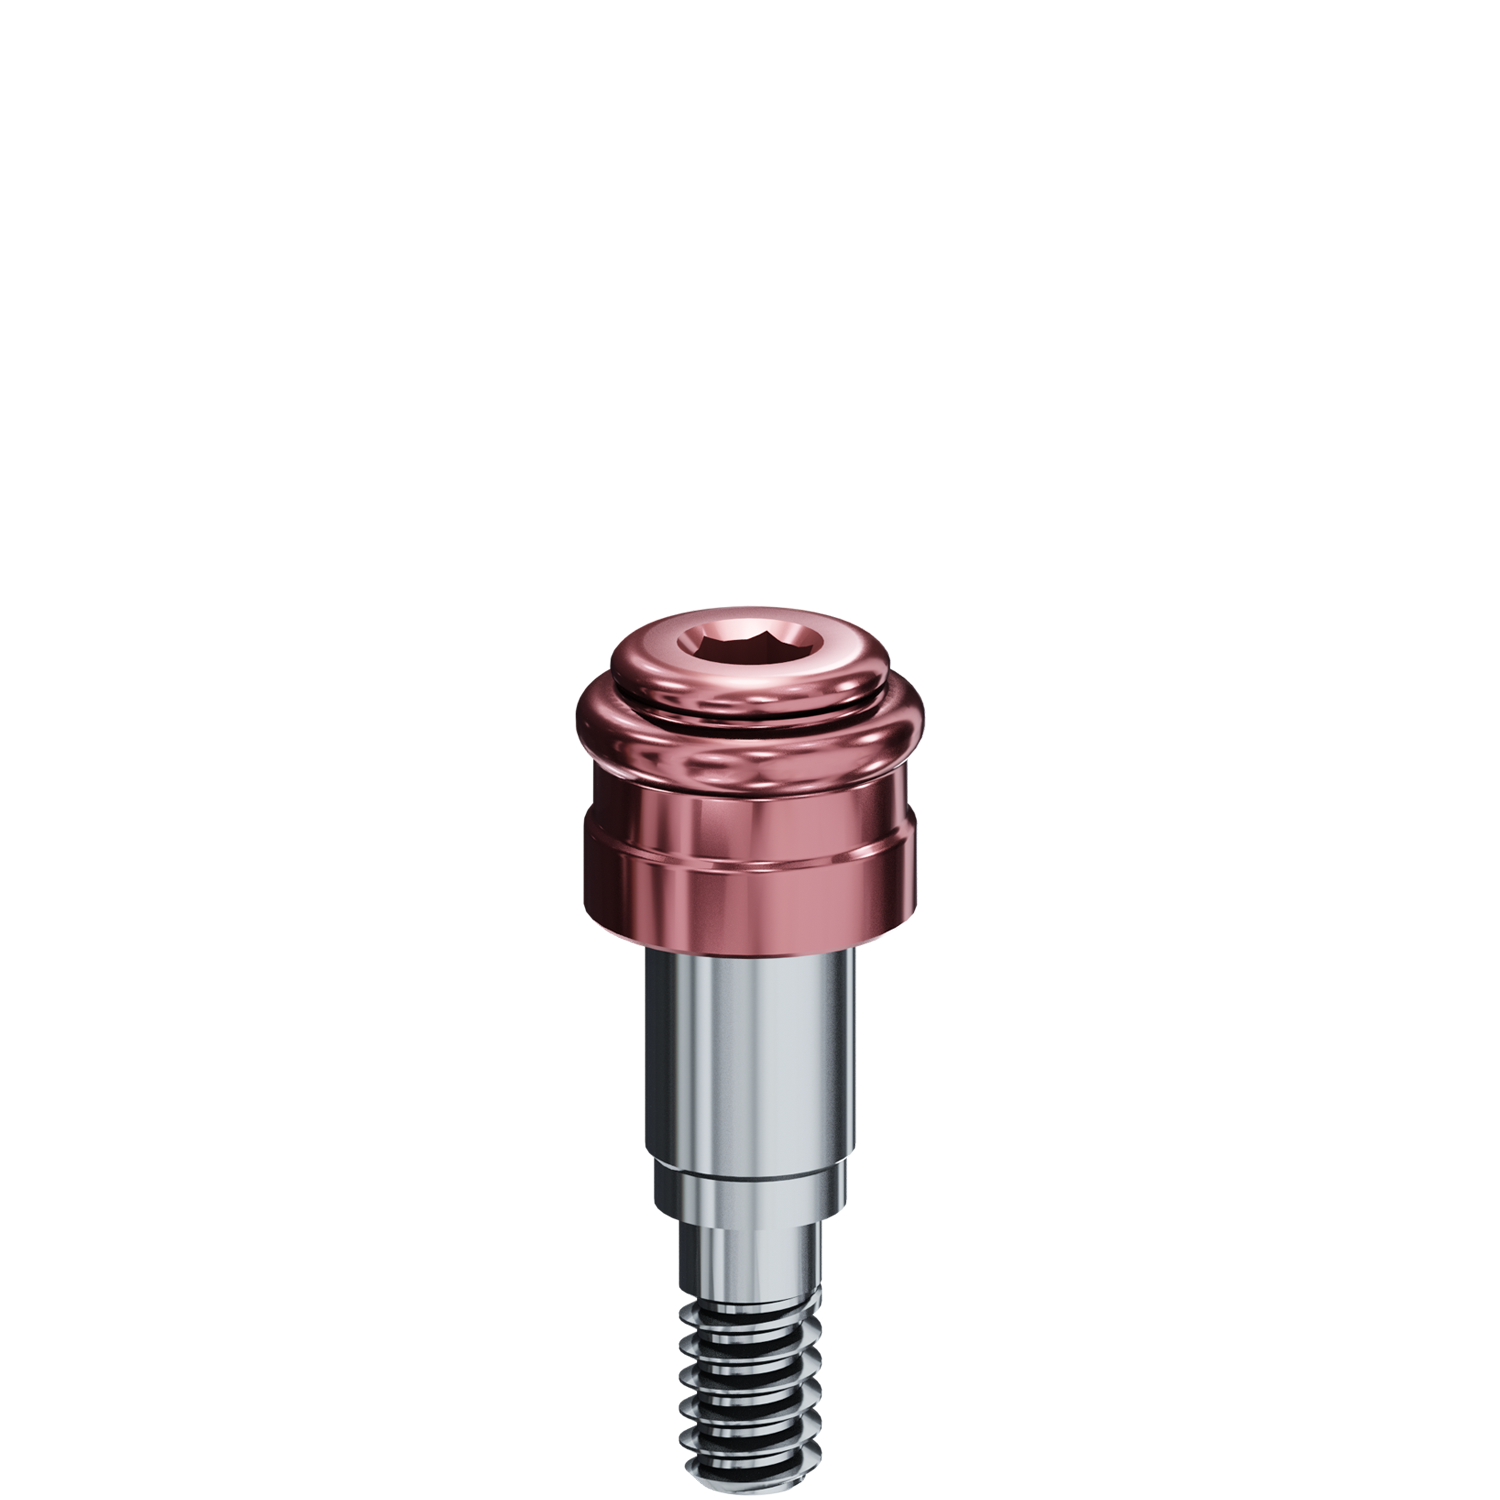 R-Tx Attachment System - 3.4mm Biomet 3i® Certain Connection - 048" Drive - 5.0mm